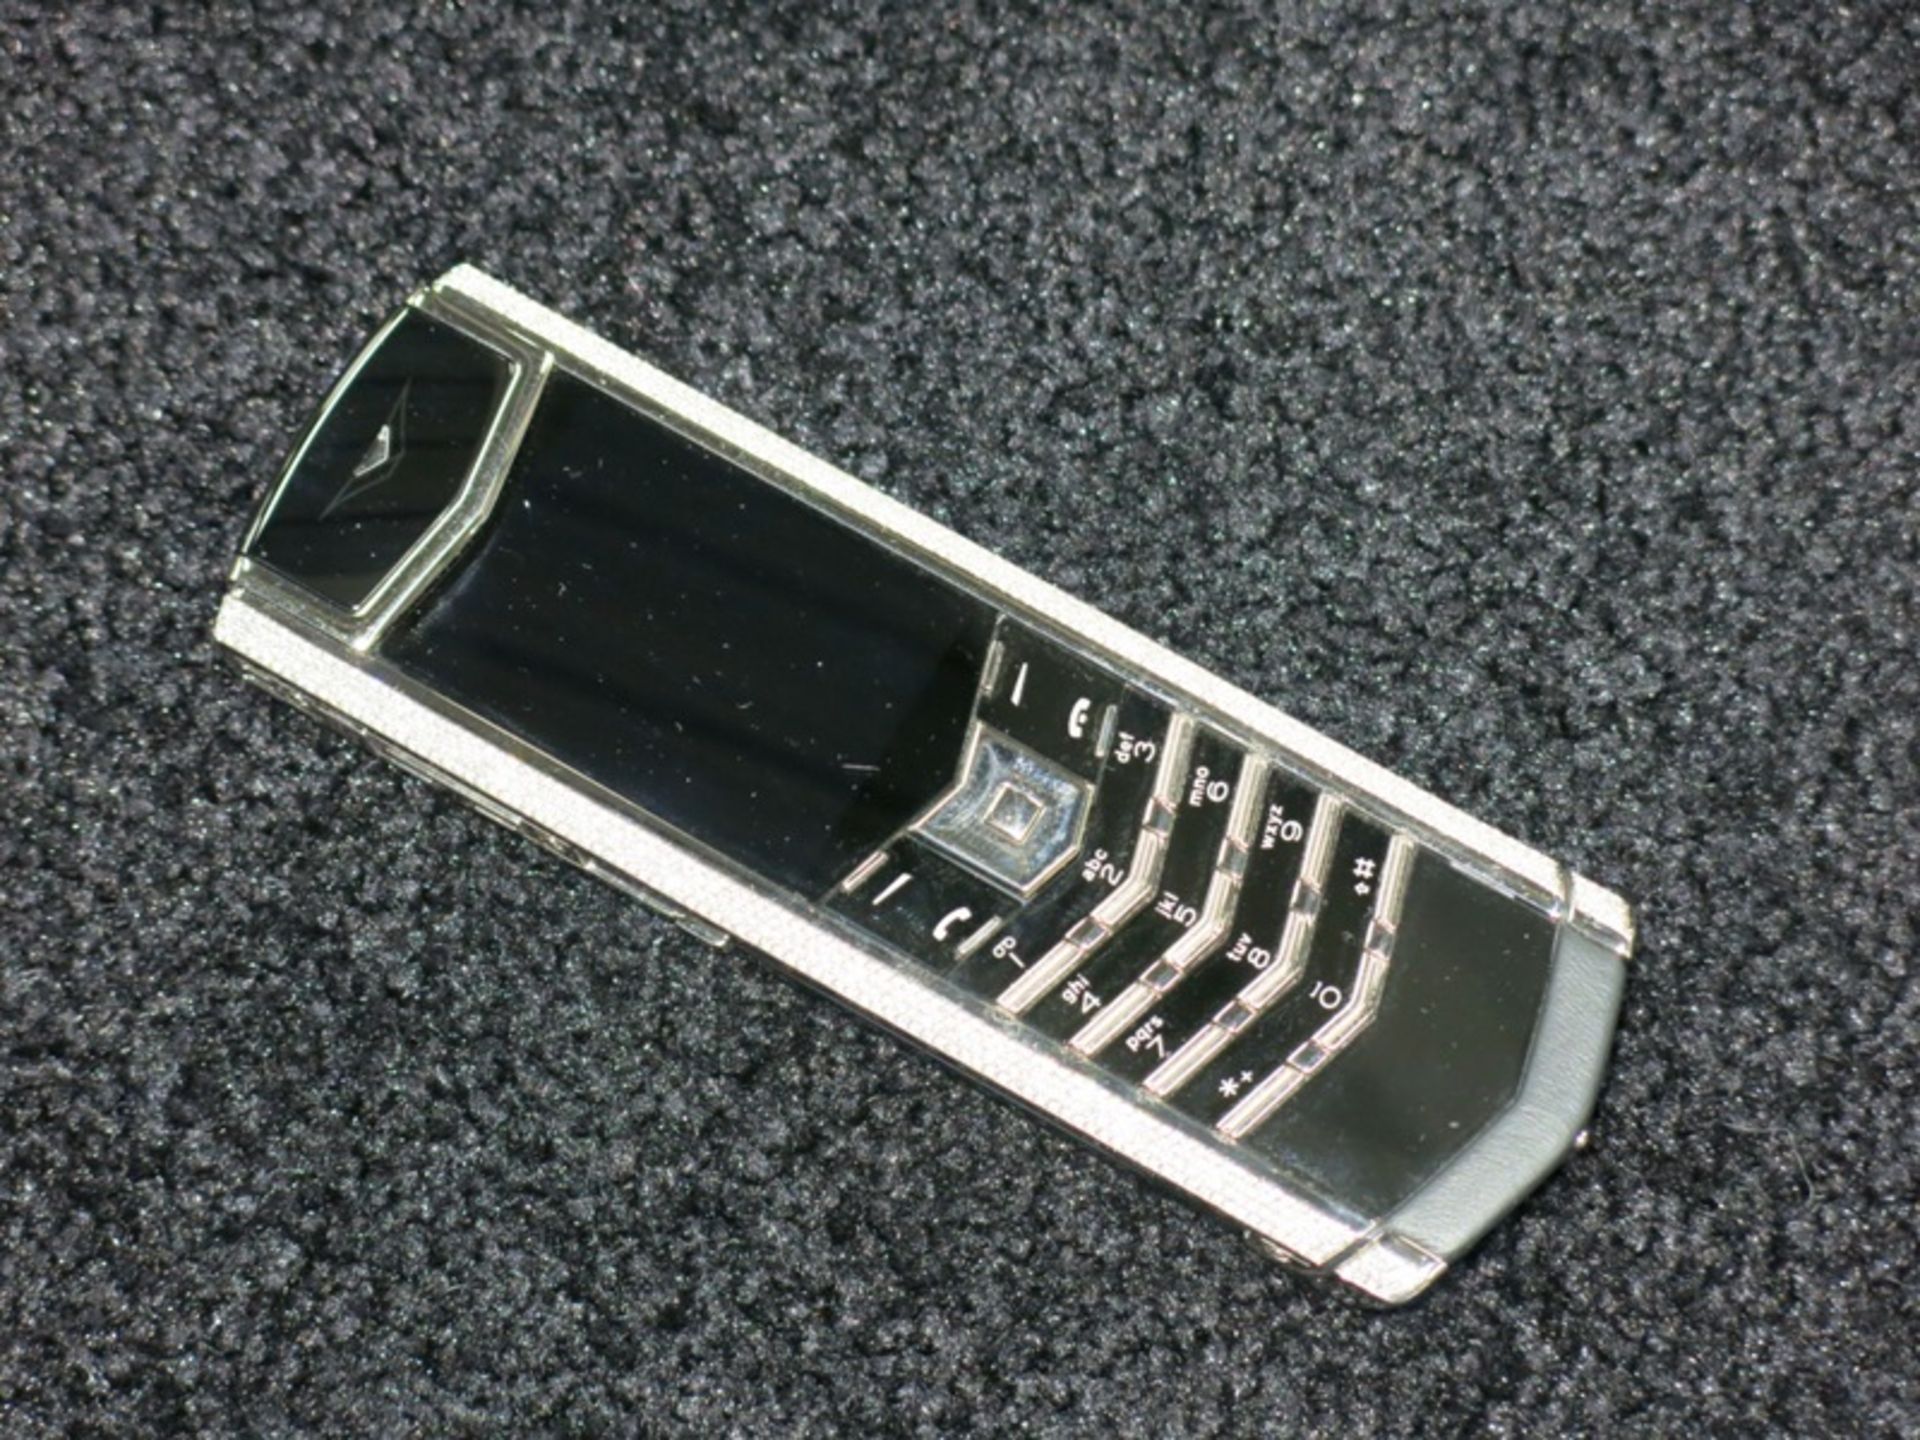 Vertu 18kt White Gold Signature S Phone with White Gold Pave Diamond Side Cheeks & IHF Ports. - Image 3 of 4